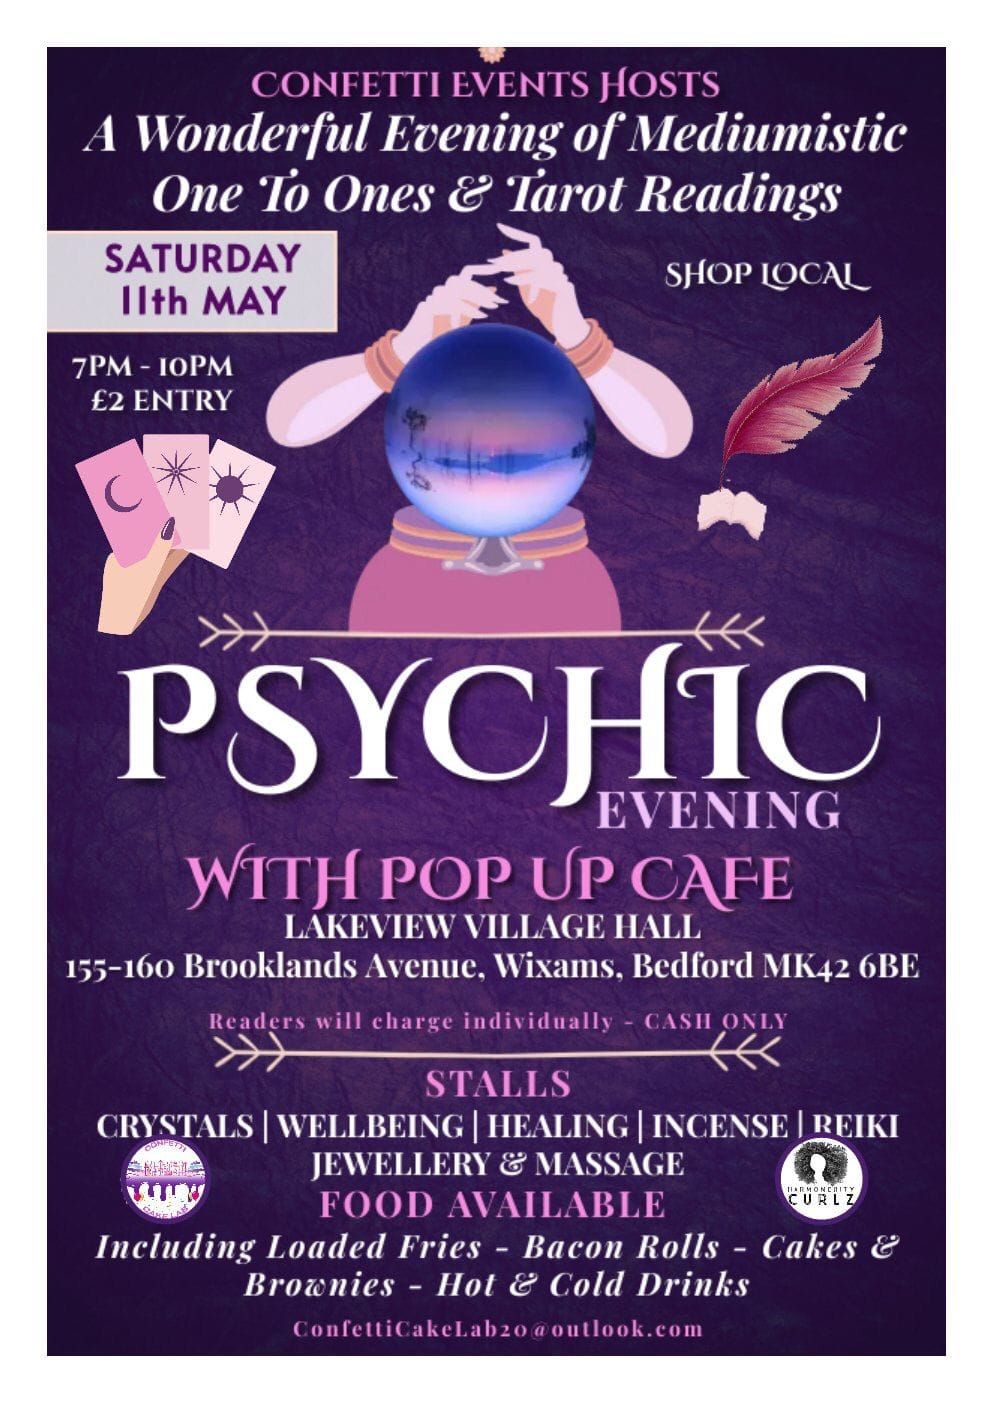 Psychic evening With pop up cafe ???